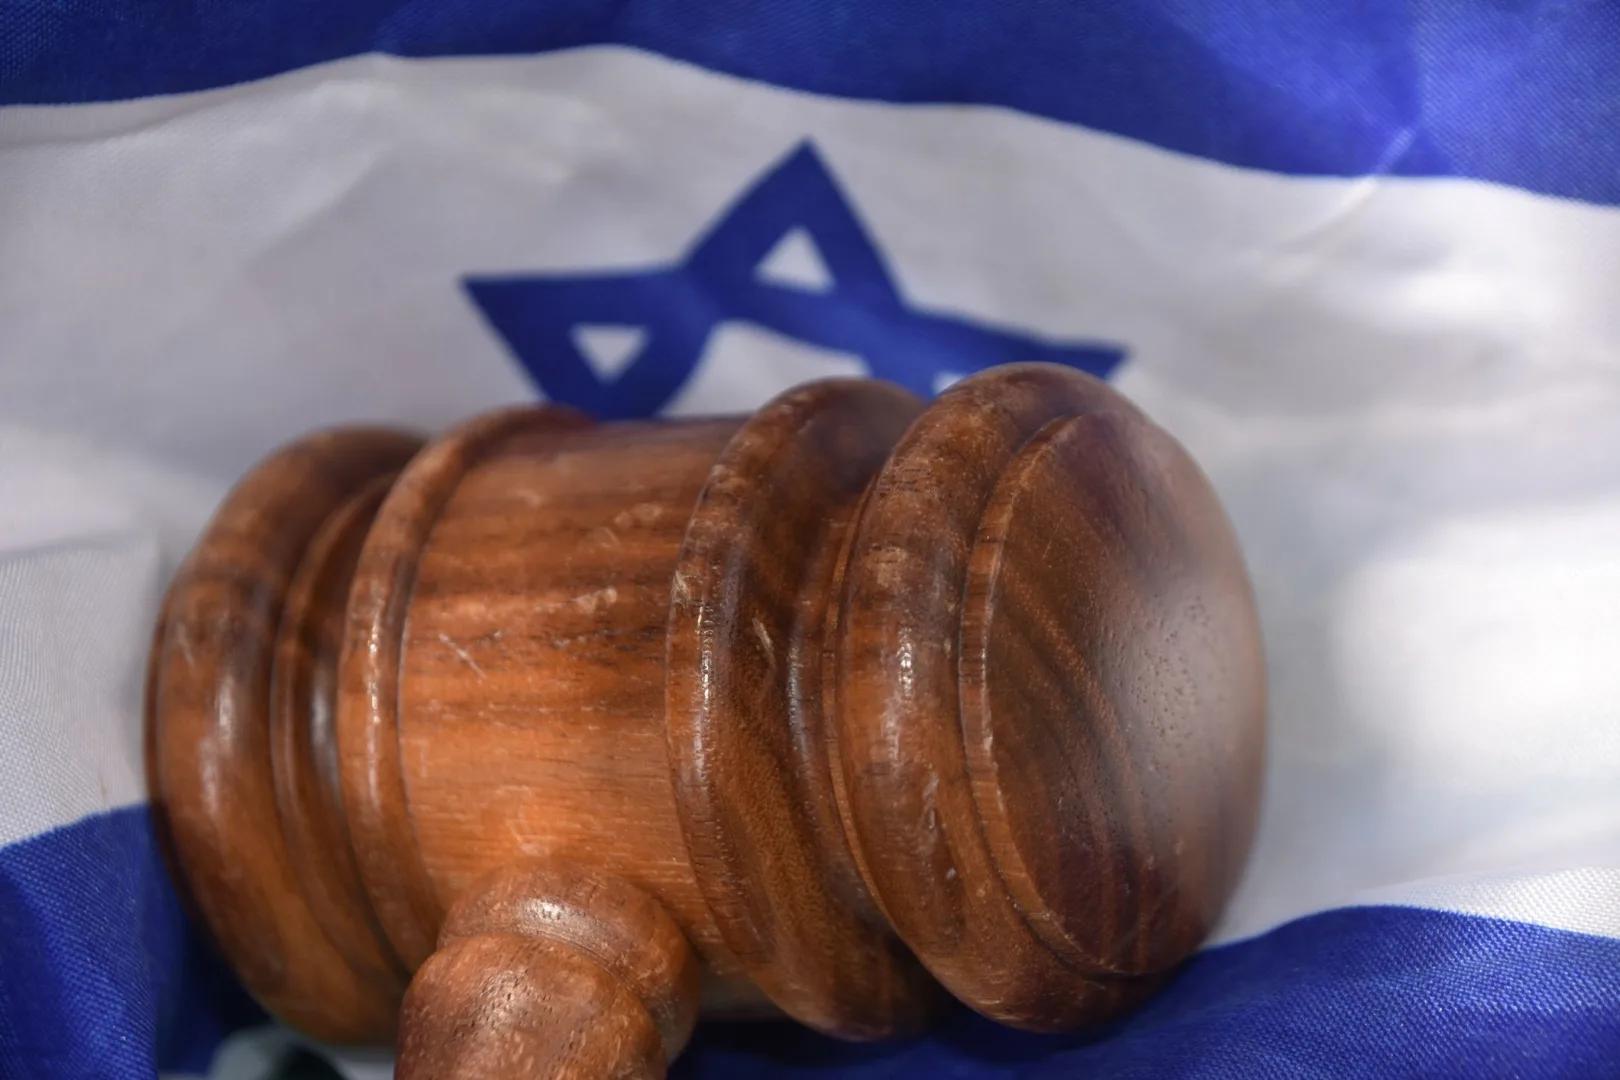 Israel Health Ministry defies court order to produce COVID data